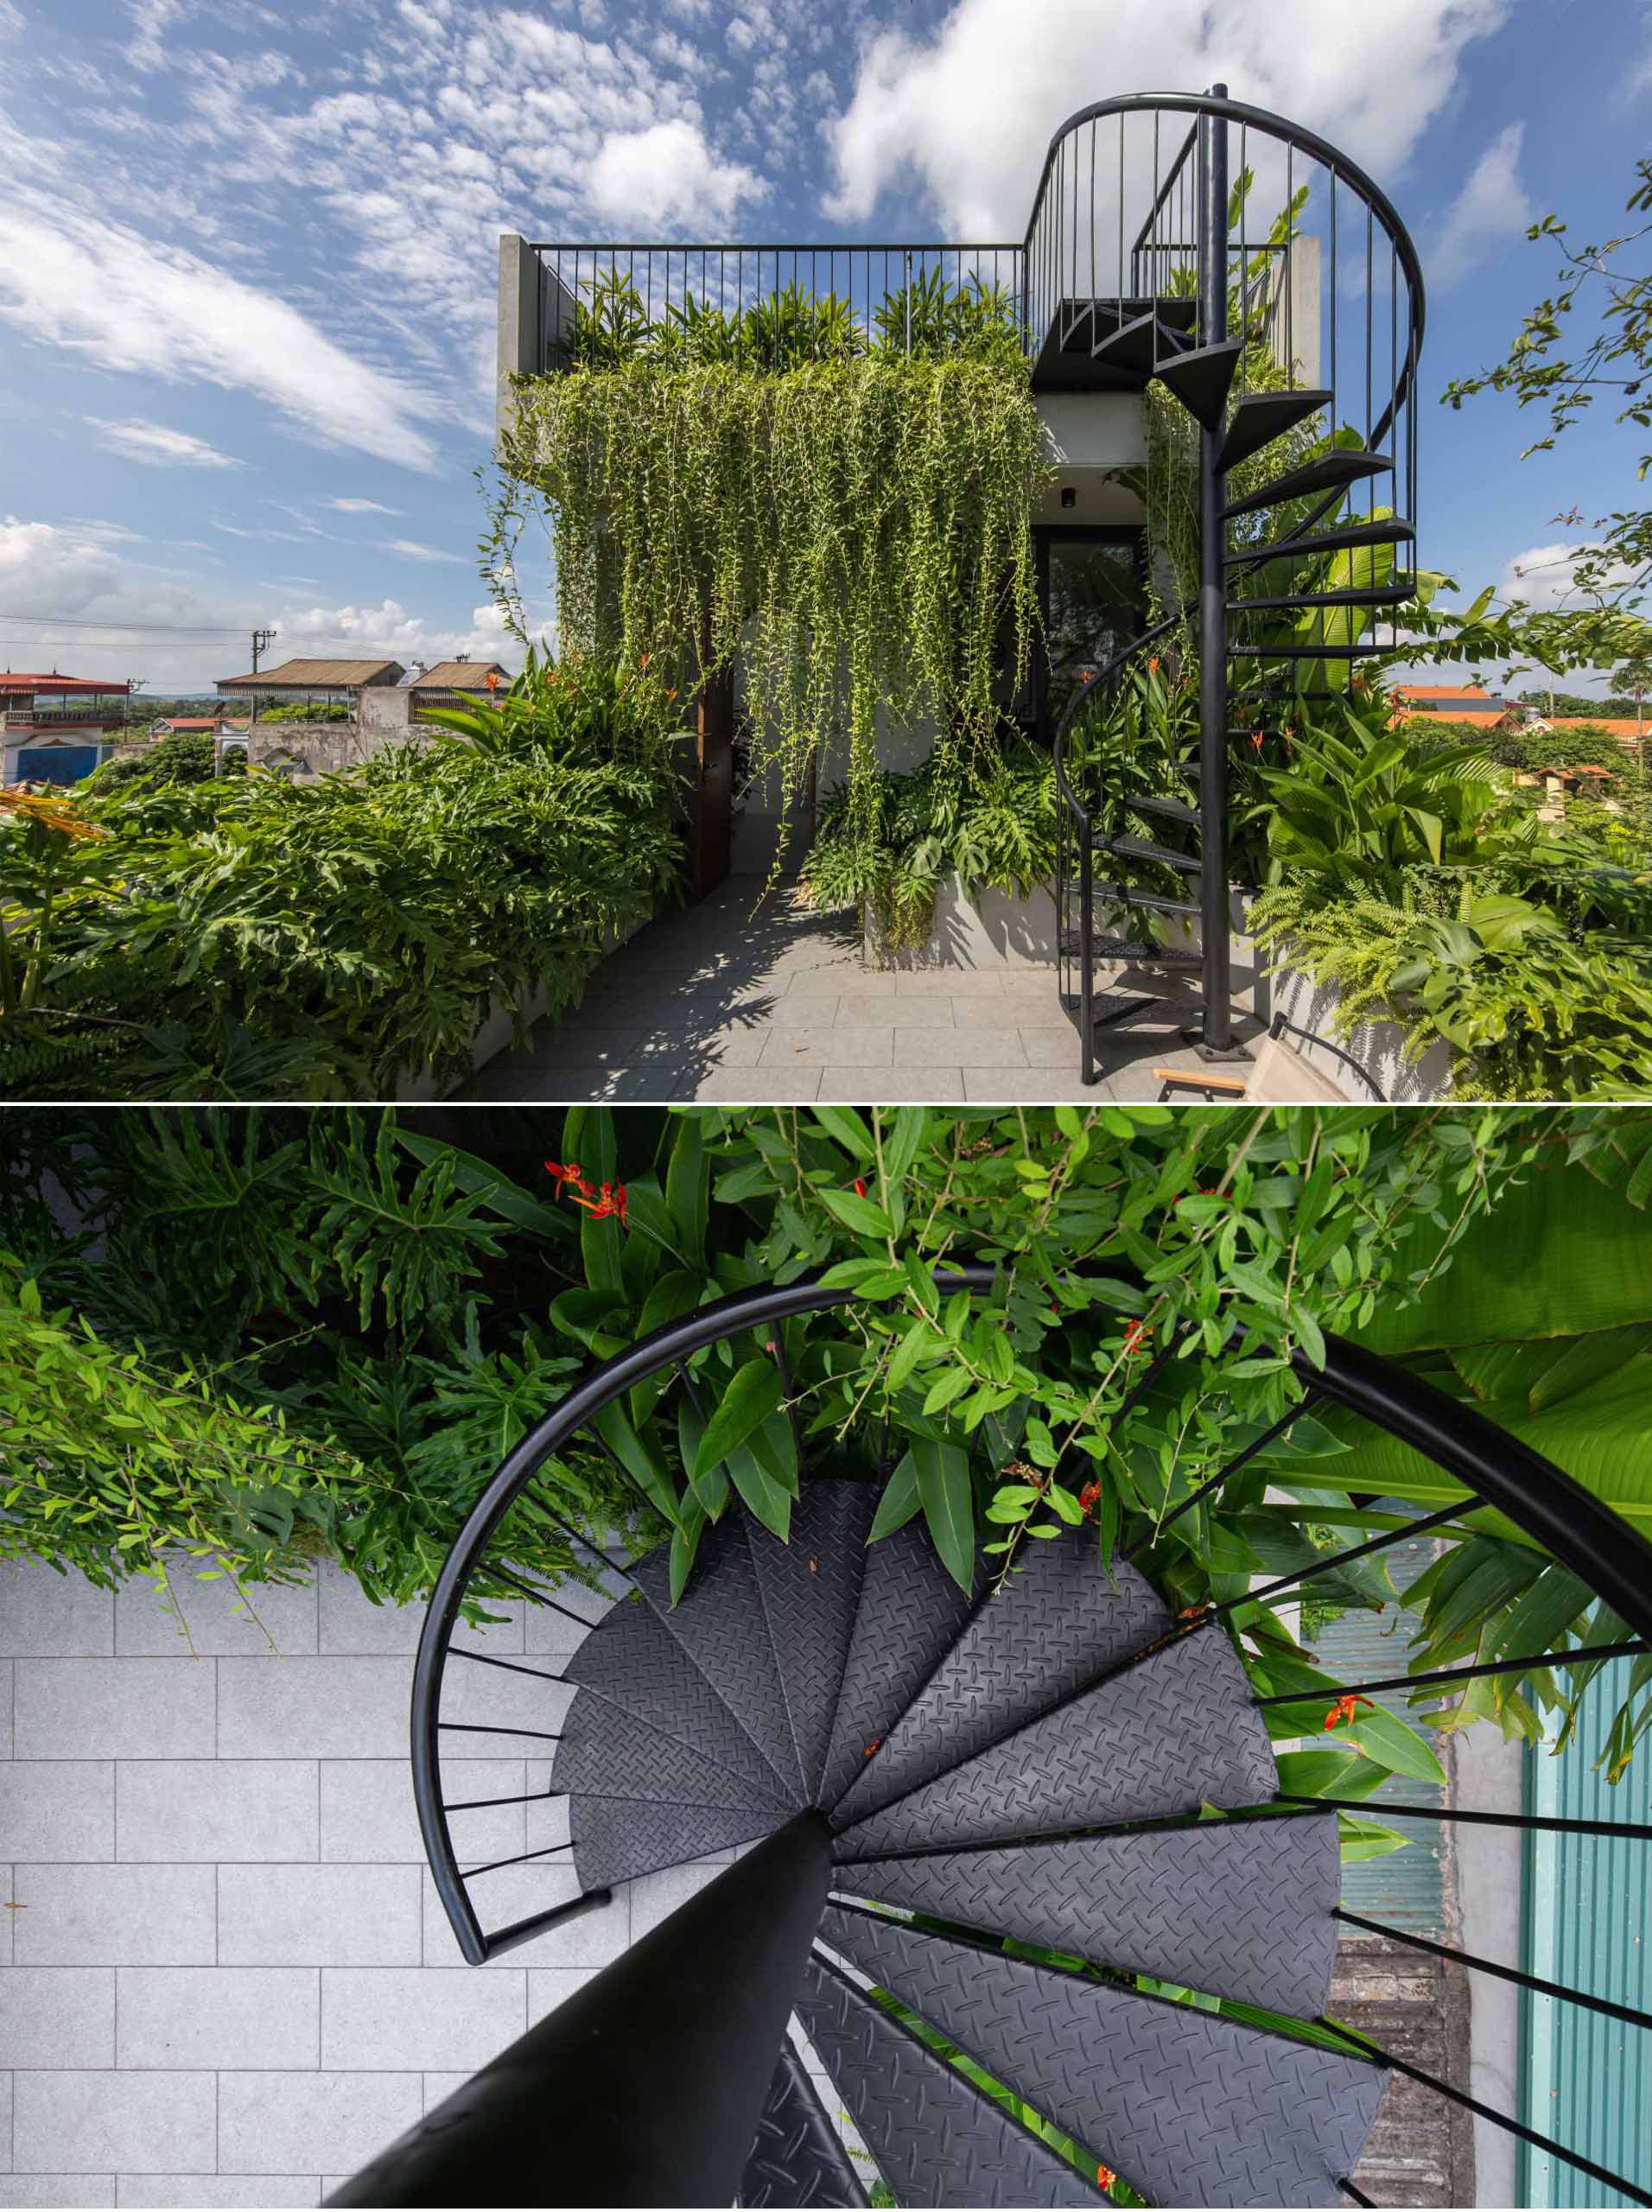 A modern rooftop patio with seating and spiral stairs that lead to an additional rooftop area with a pergola and more plants.